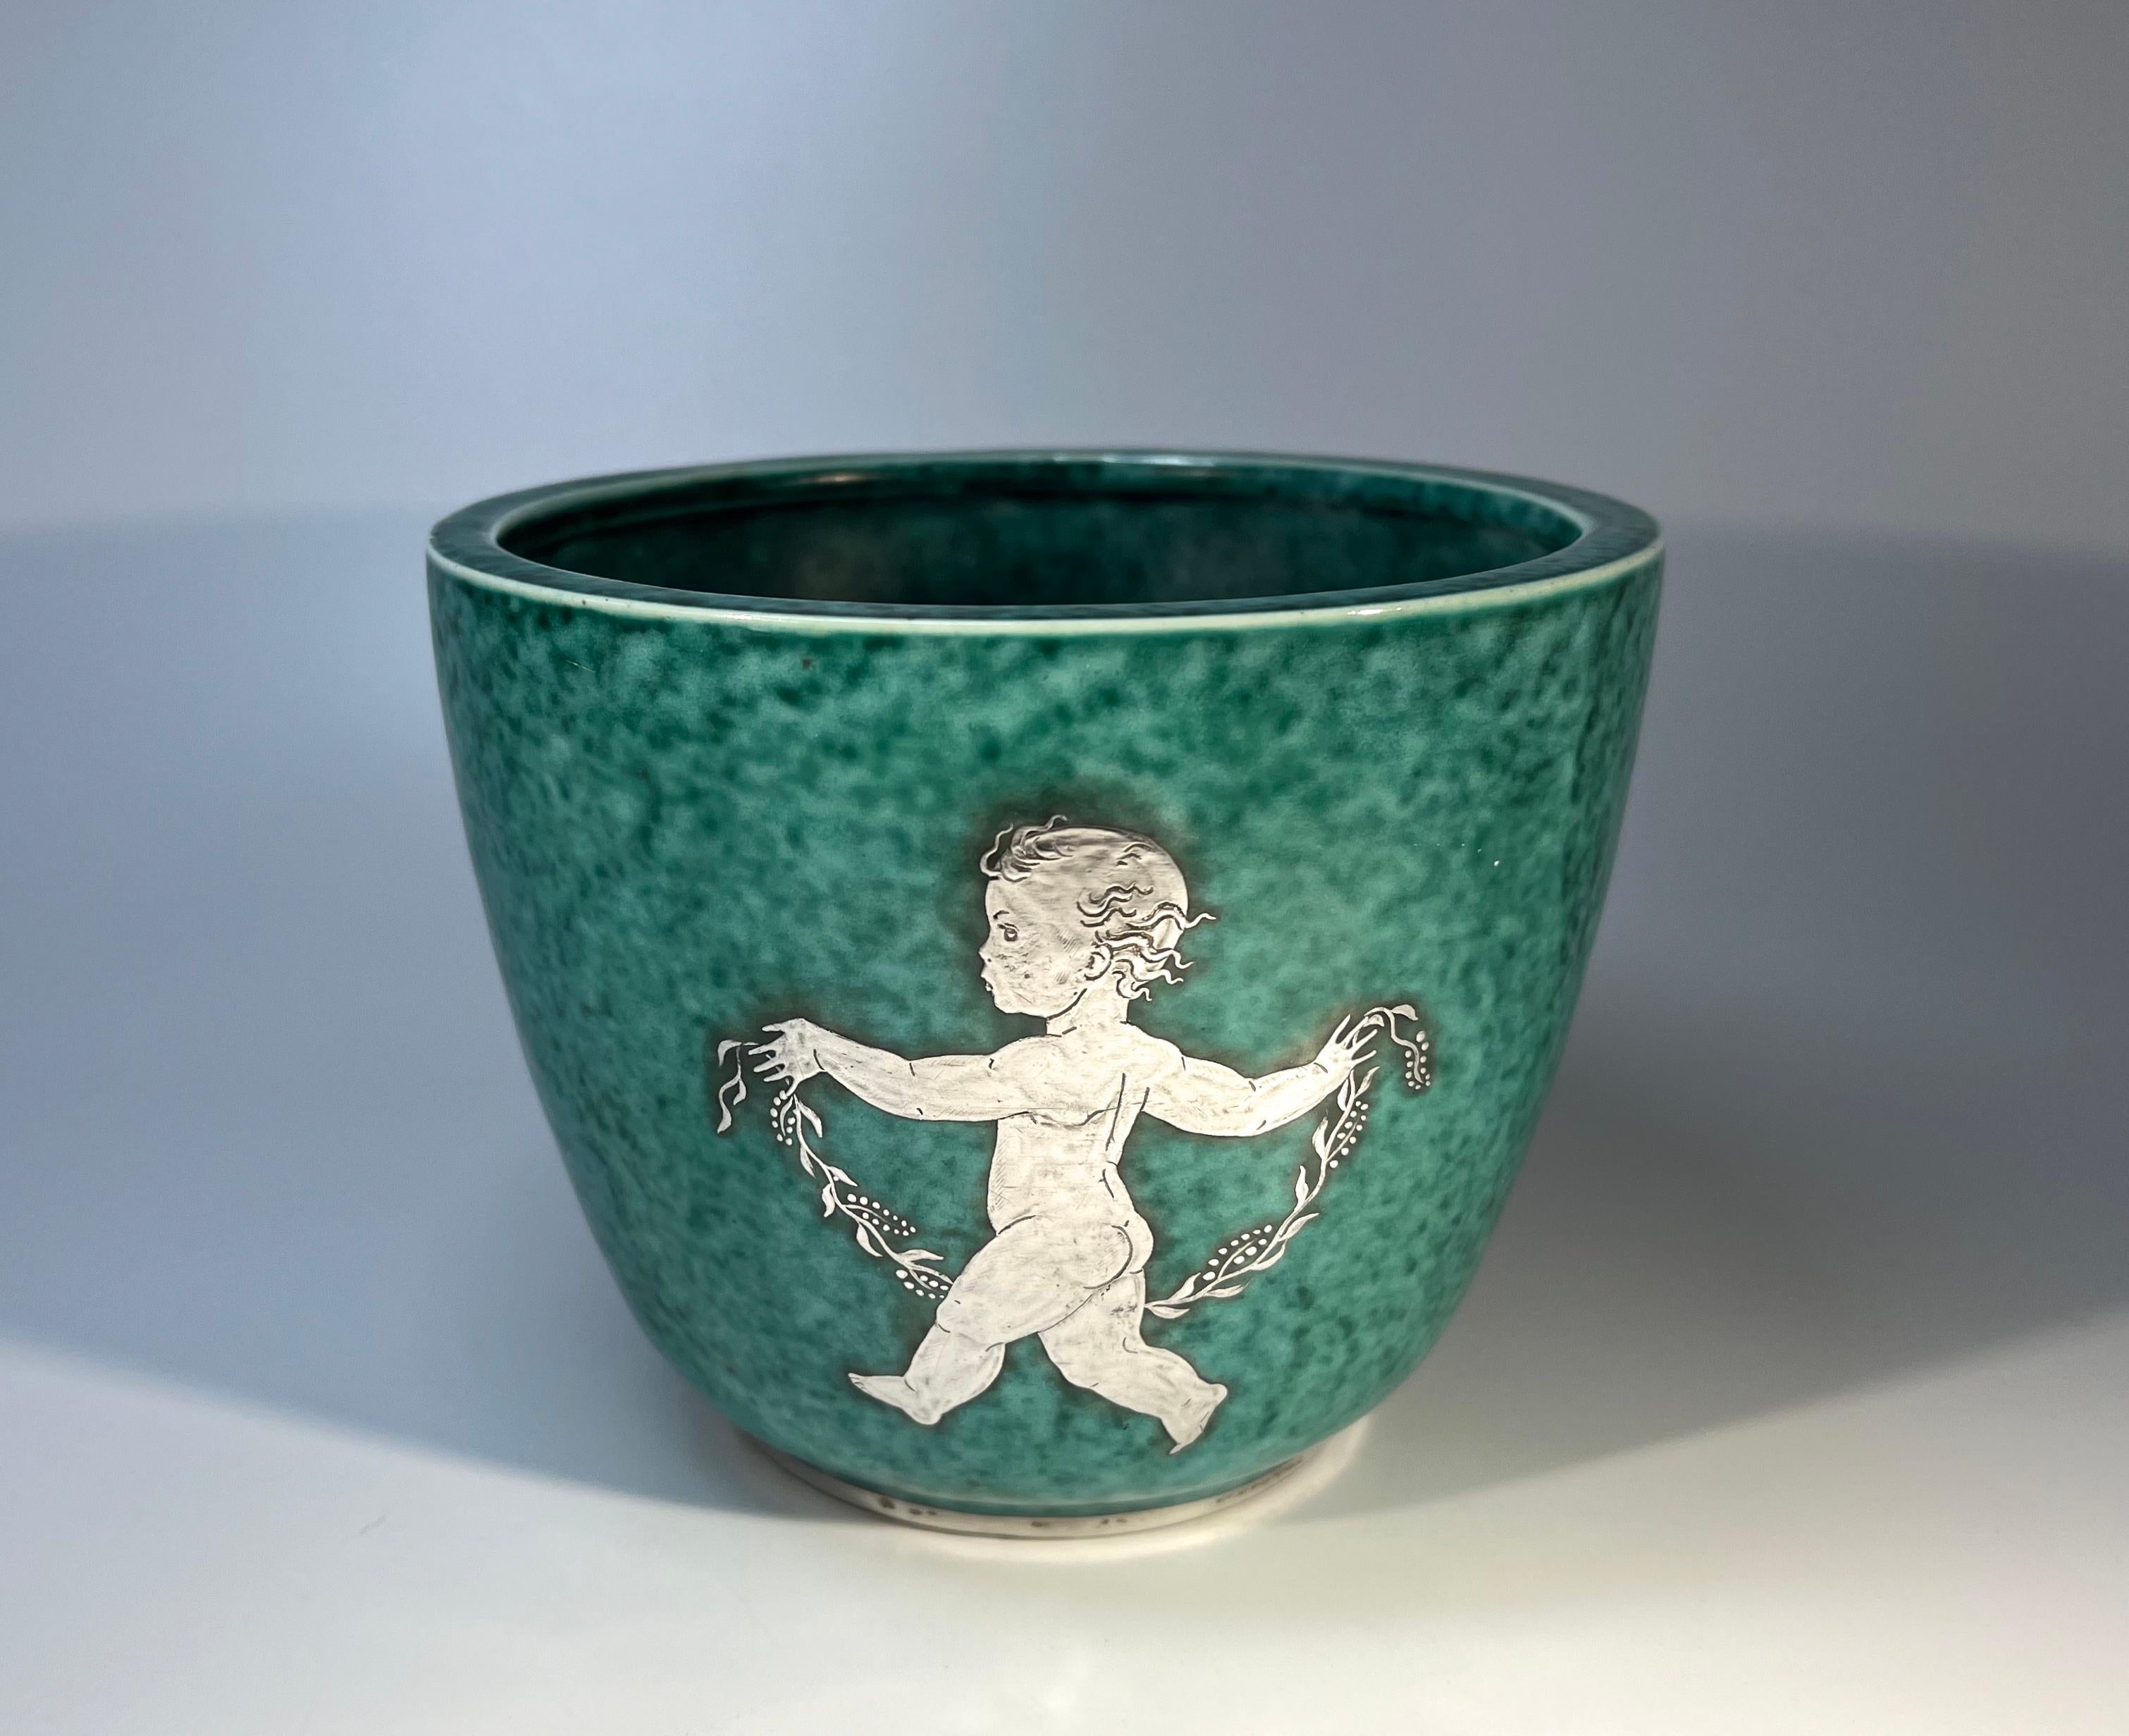 A trio of cherubs with garlands decorate this cache pot designed by Wilhelm Kage for Gustavsberg, Sweden.
Argenta stoneware piece, characterised by the mottled green glaze and applied silver decoration
Circa 1937. Date letter G
Signed Gustavsberg I